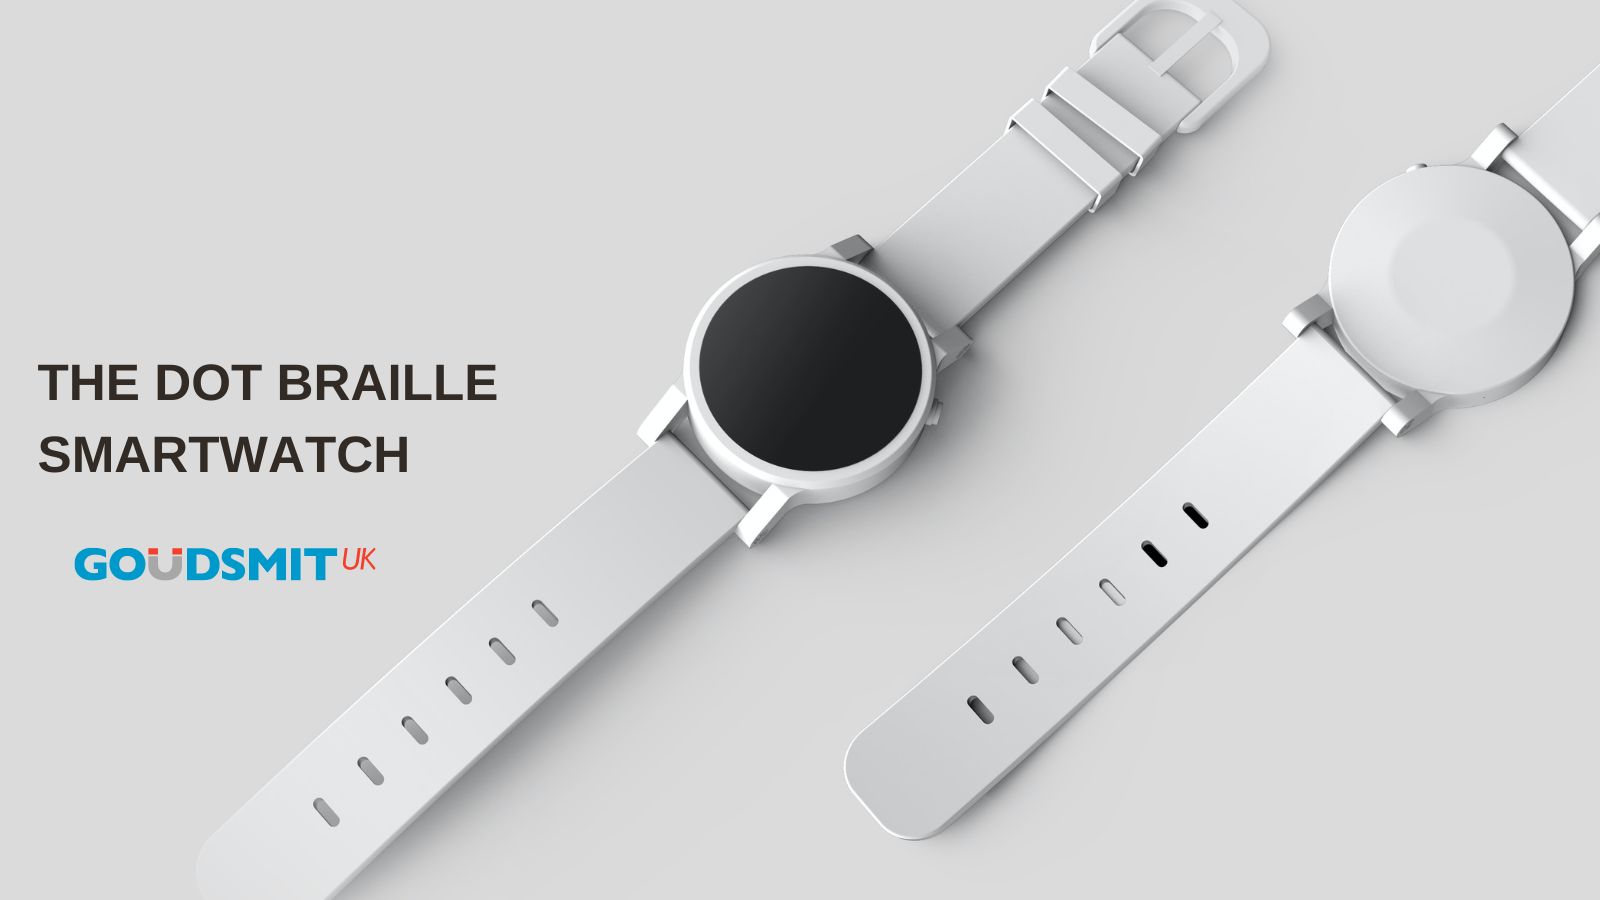 The Dot Braille Smartwatch